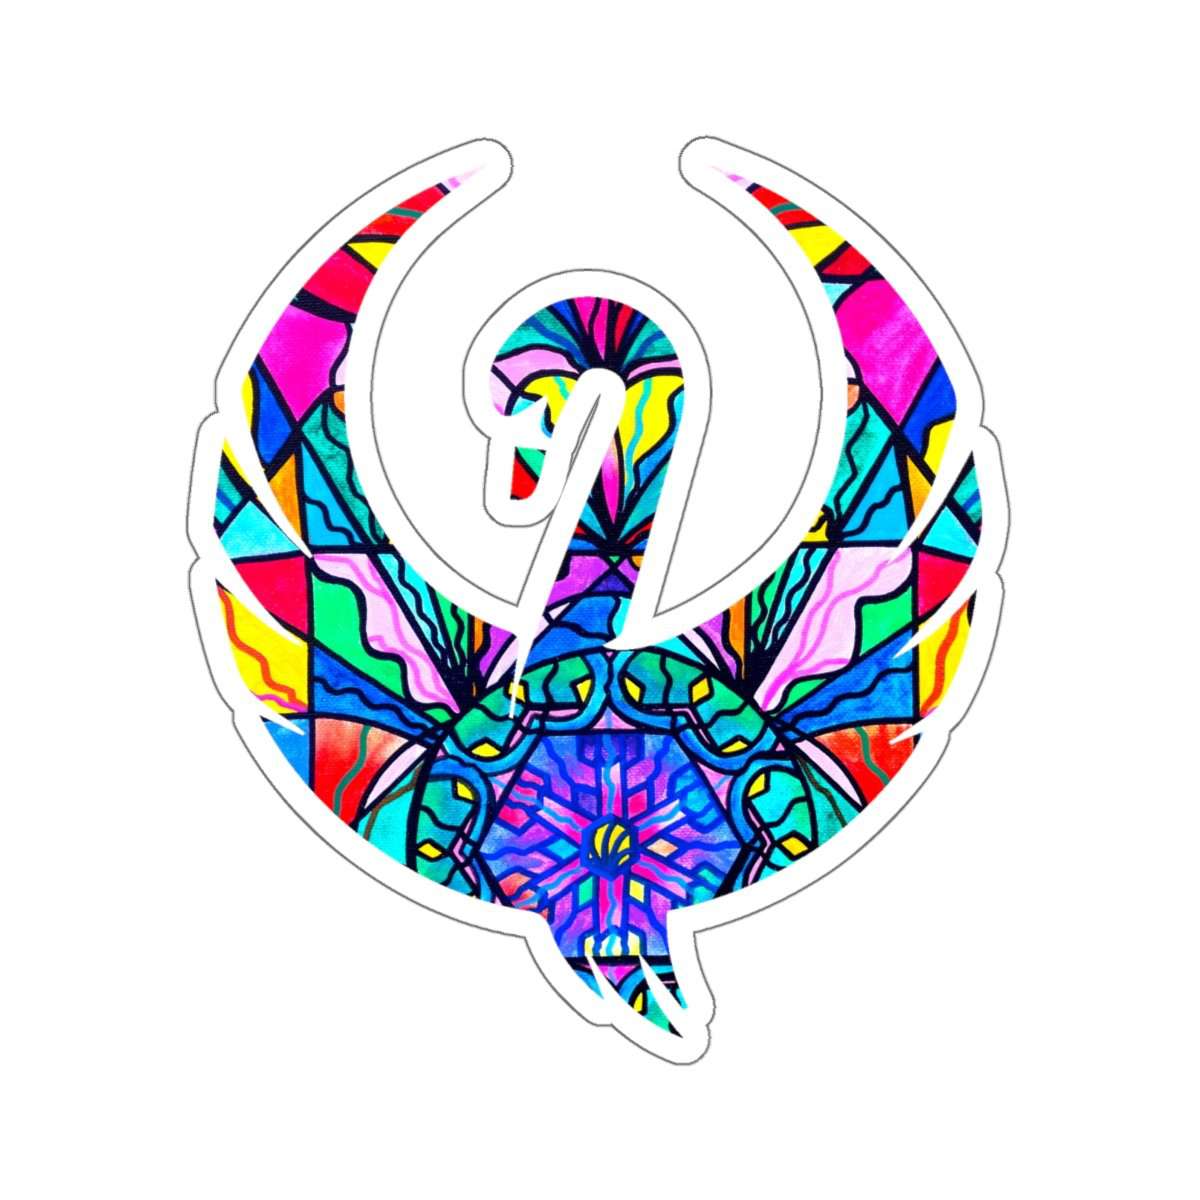 be-the-first-to-own-the-newest-anahata-heart-chakra-swan-stickers-supply_2.jpg